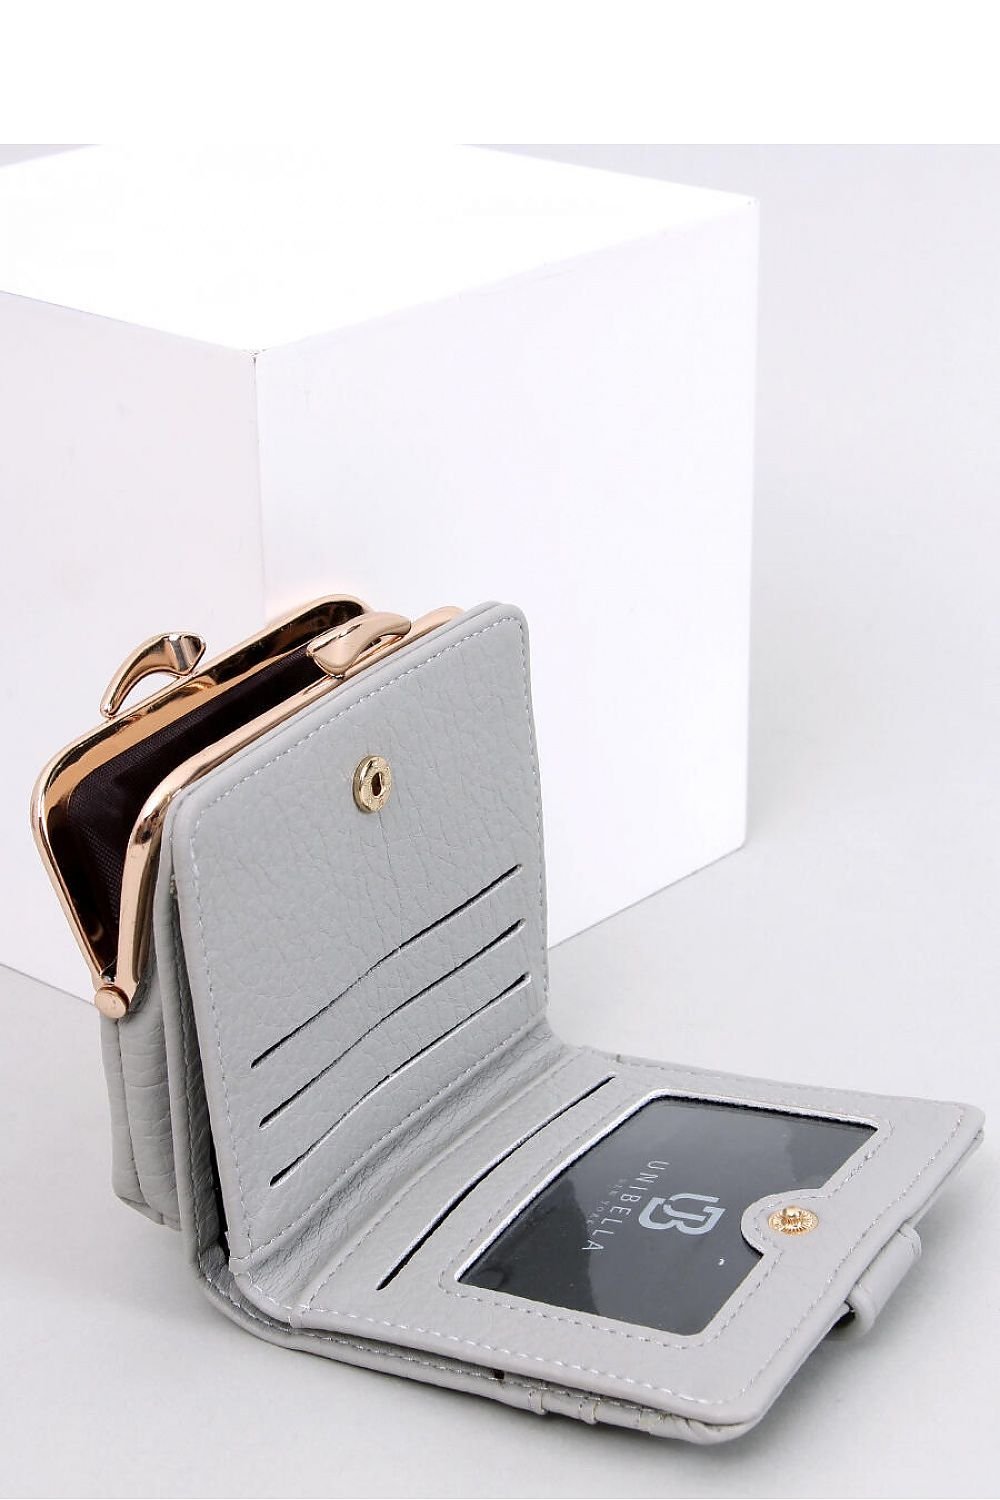 Wallet - M&H FashionWalletM&H FashionM&H Fashion192415_1116807one-size-fits-allWallet InelloM&H FashionM&H FashionCompact women's wallet. This small but practical model will definitely meet your expectations.... It will also be perfect as a gift : ) Inside there are numerous comWallet